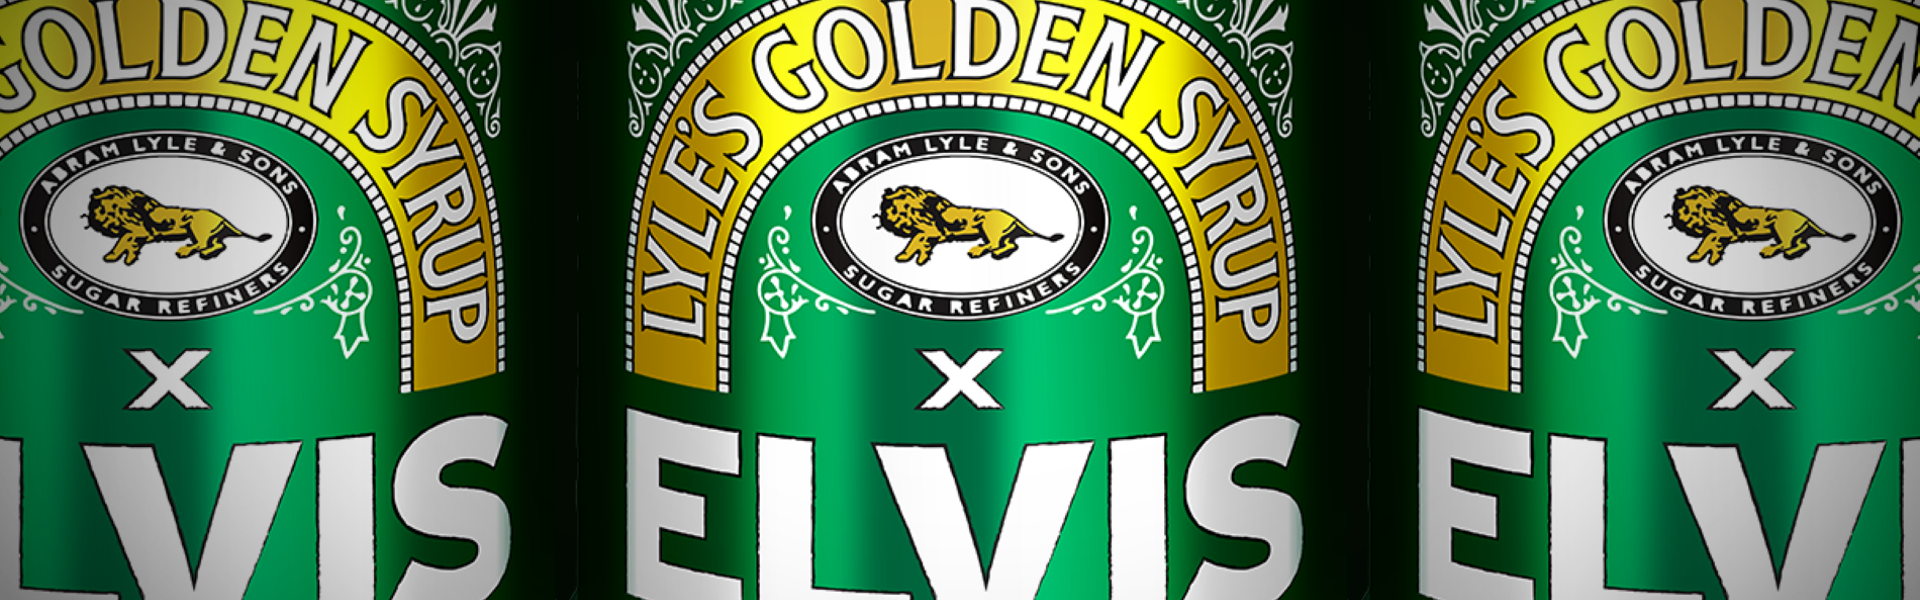 Tate & Lyle Sugars appoints elvis as lead UK creative agency for iconic Lyle's Golden Syrup brand